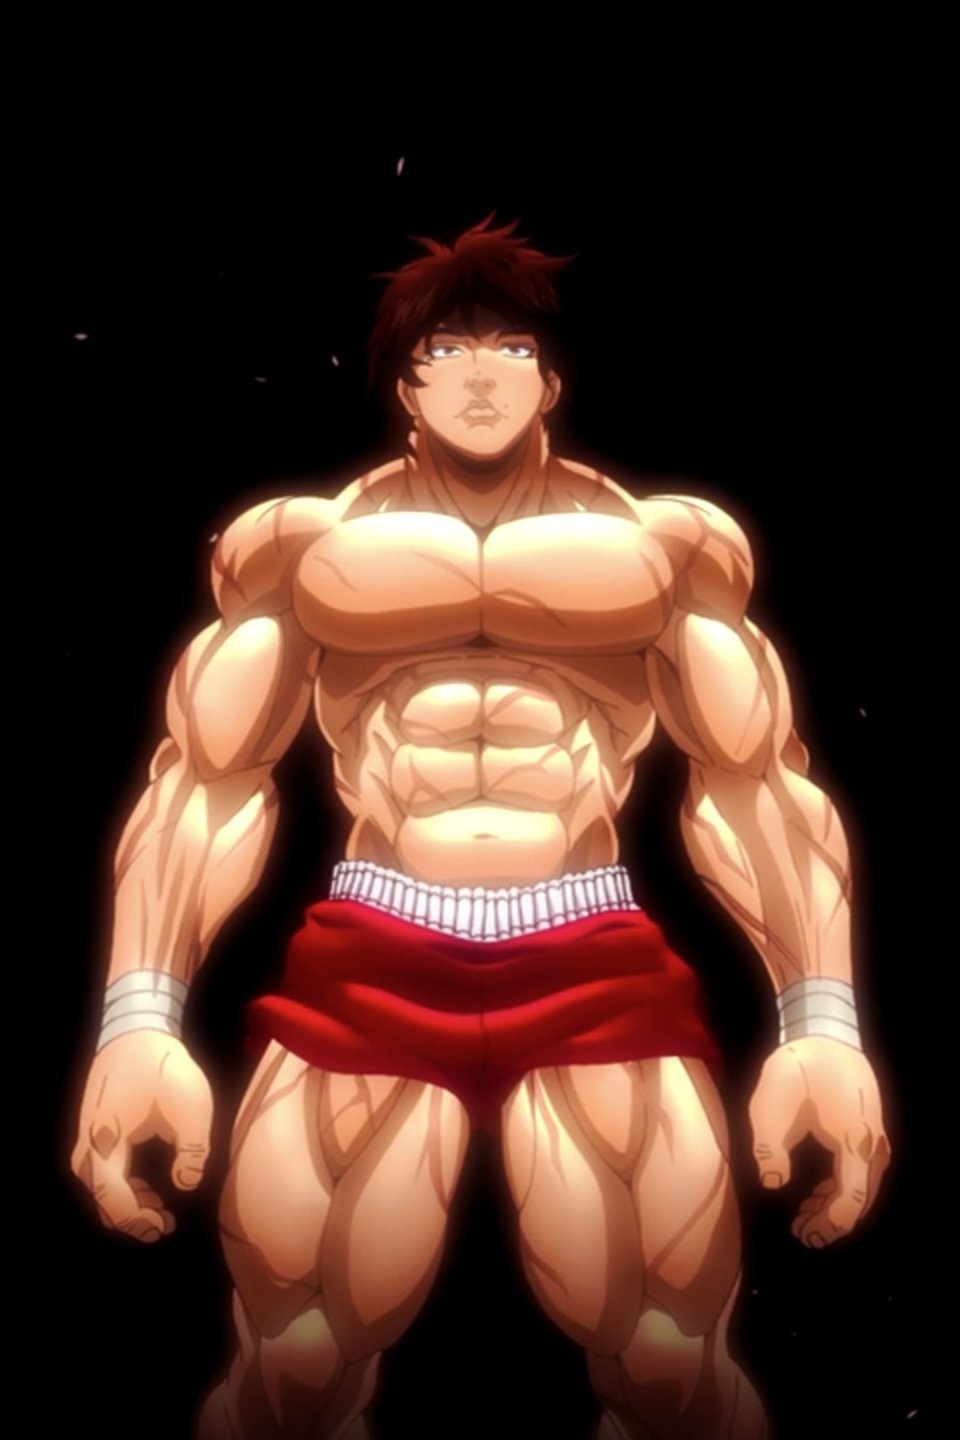 Why do I workout? To be the strongest 18 year old. #baki #anime #explore